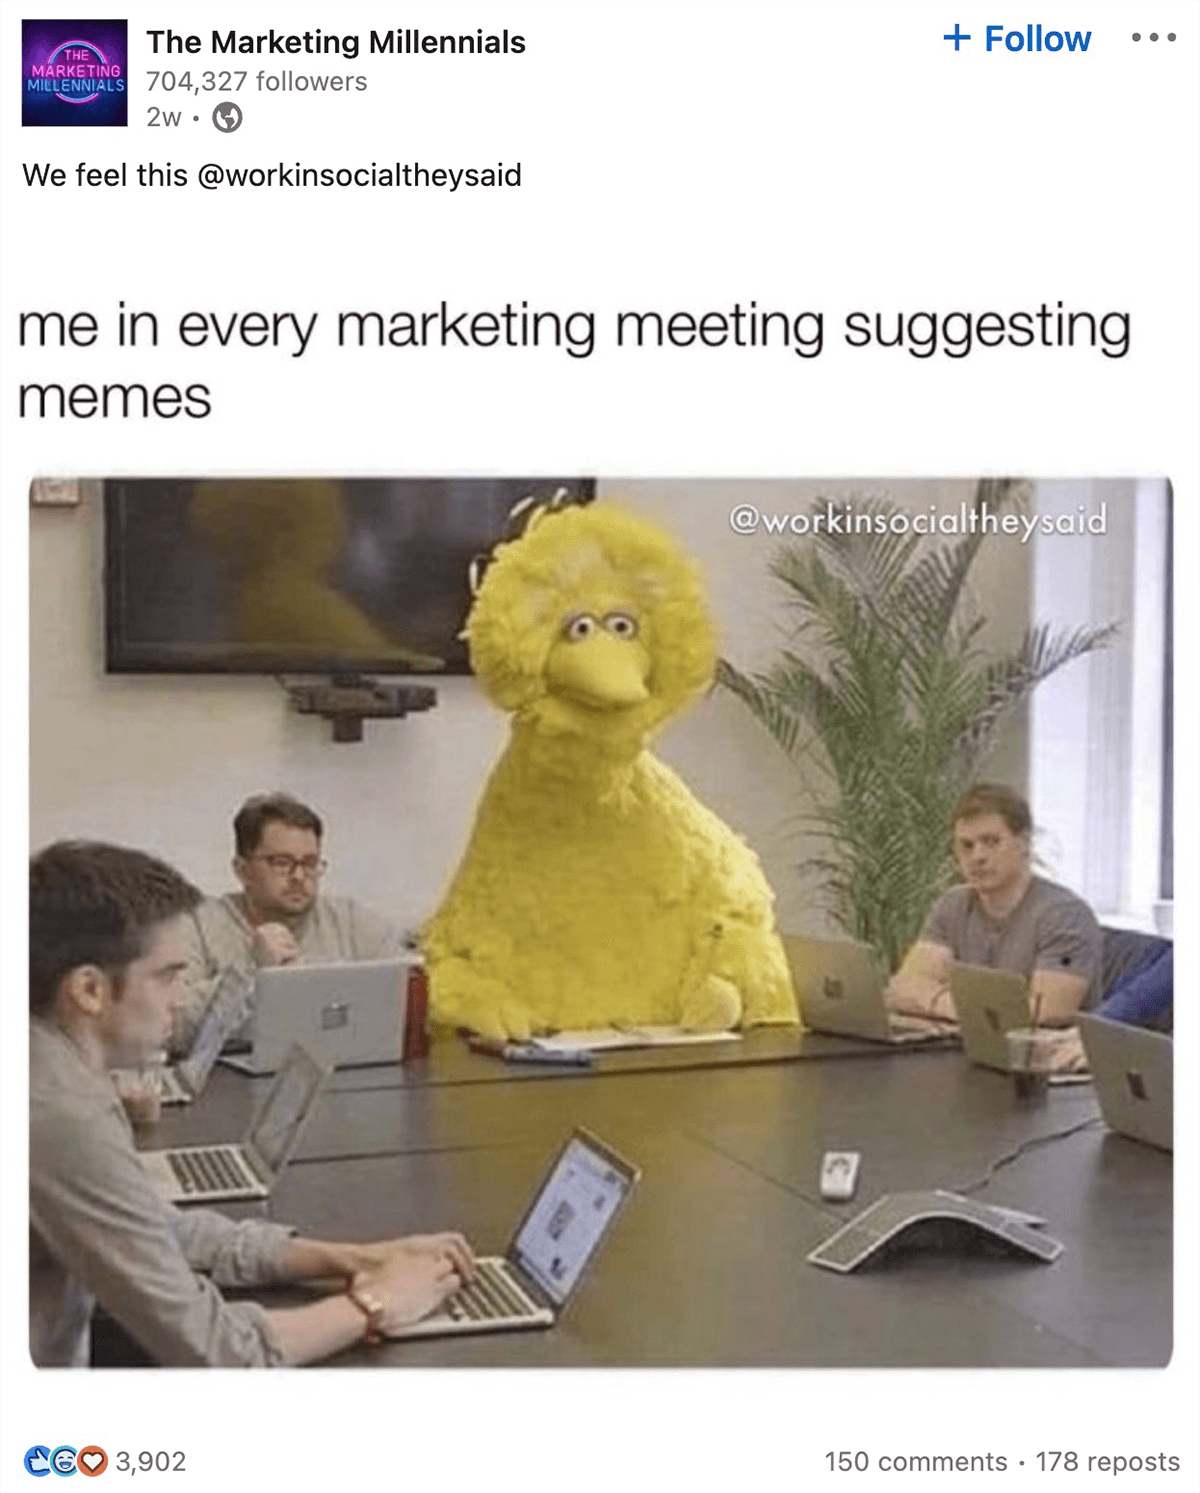 The Marketing Millennials on Linkedin: We feel this @workinsocialtheysaid: Me in every marketing meeting suggesting memes - image of Big Bird in a meeting with a bunch of people in suits.